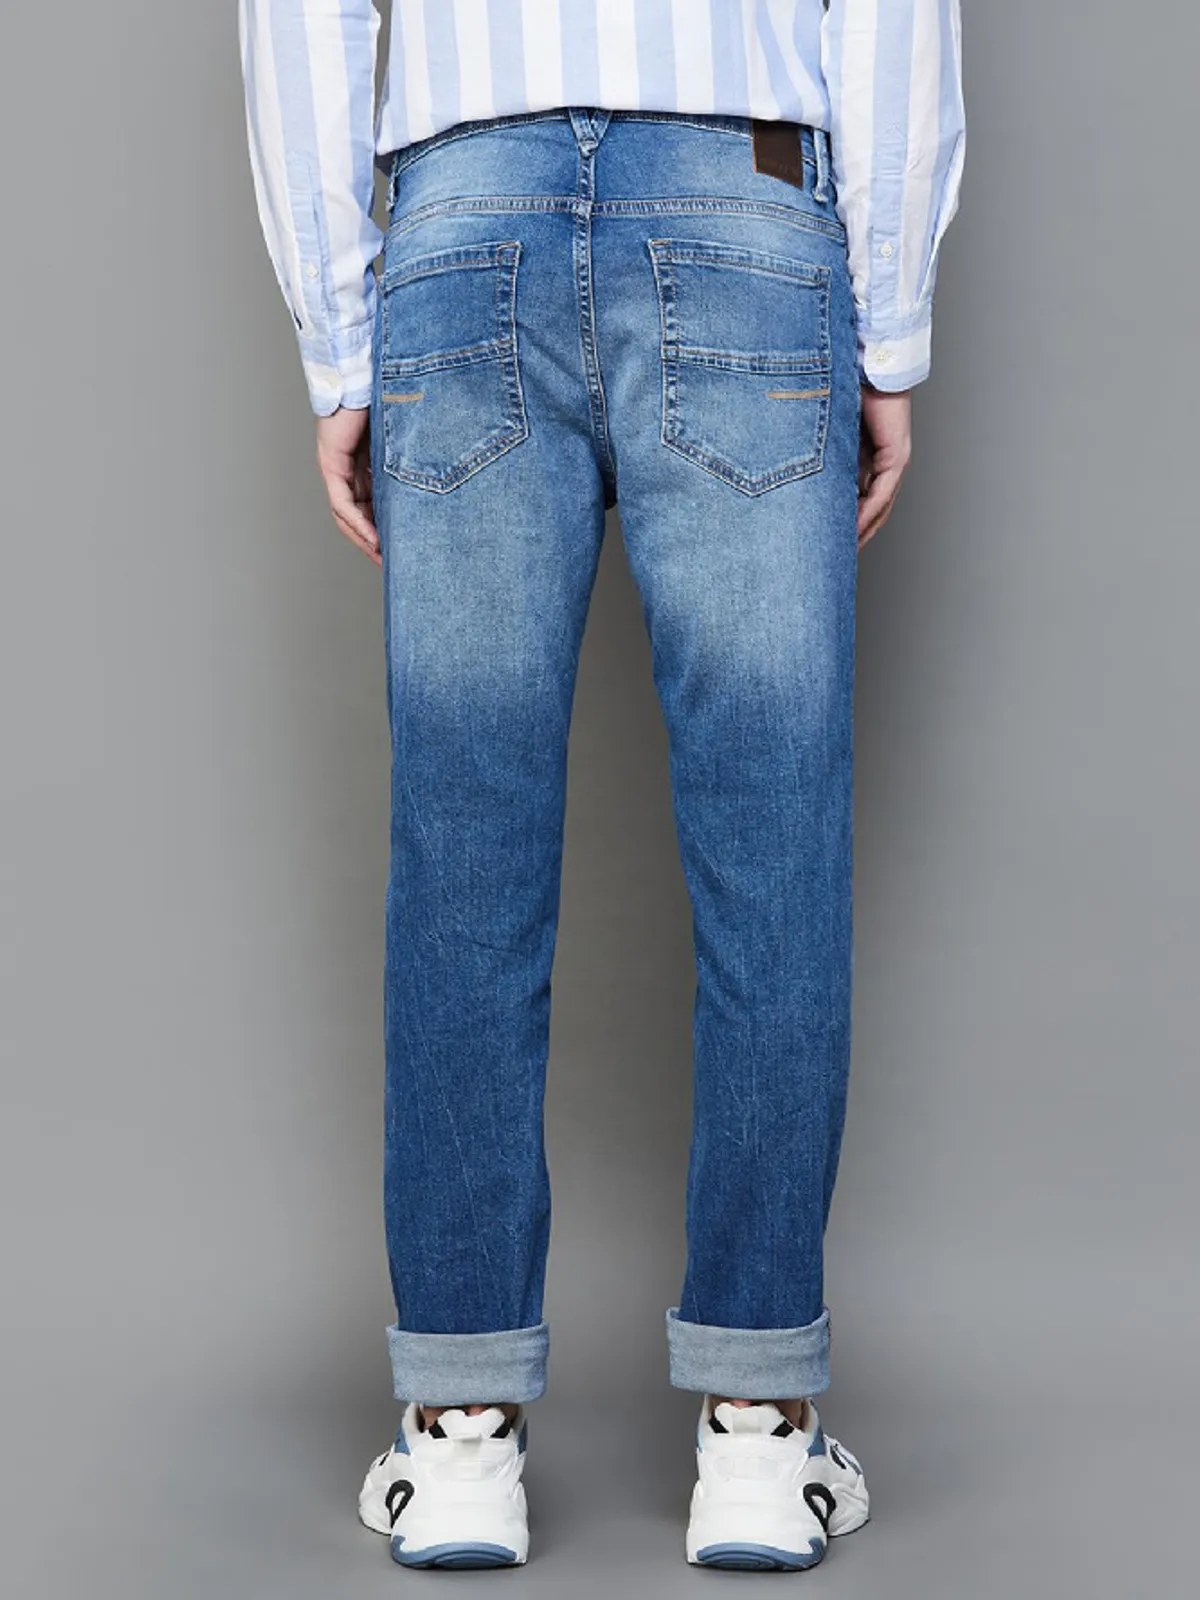 UCB blue washed skinny fit jeans